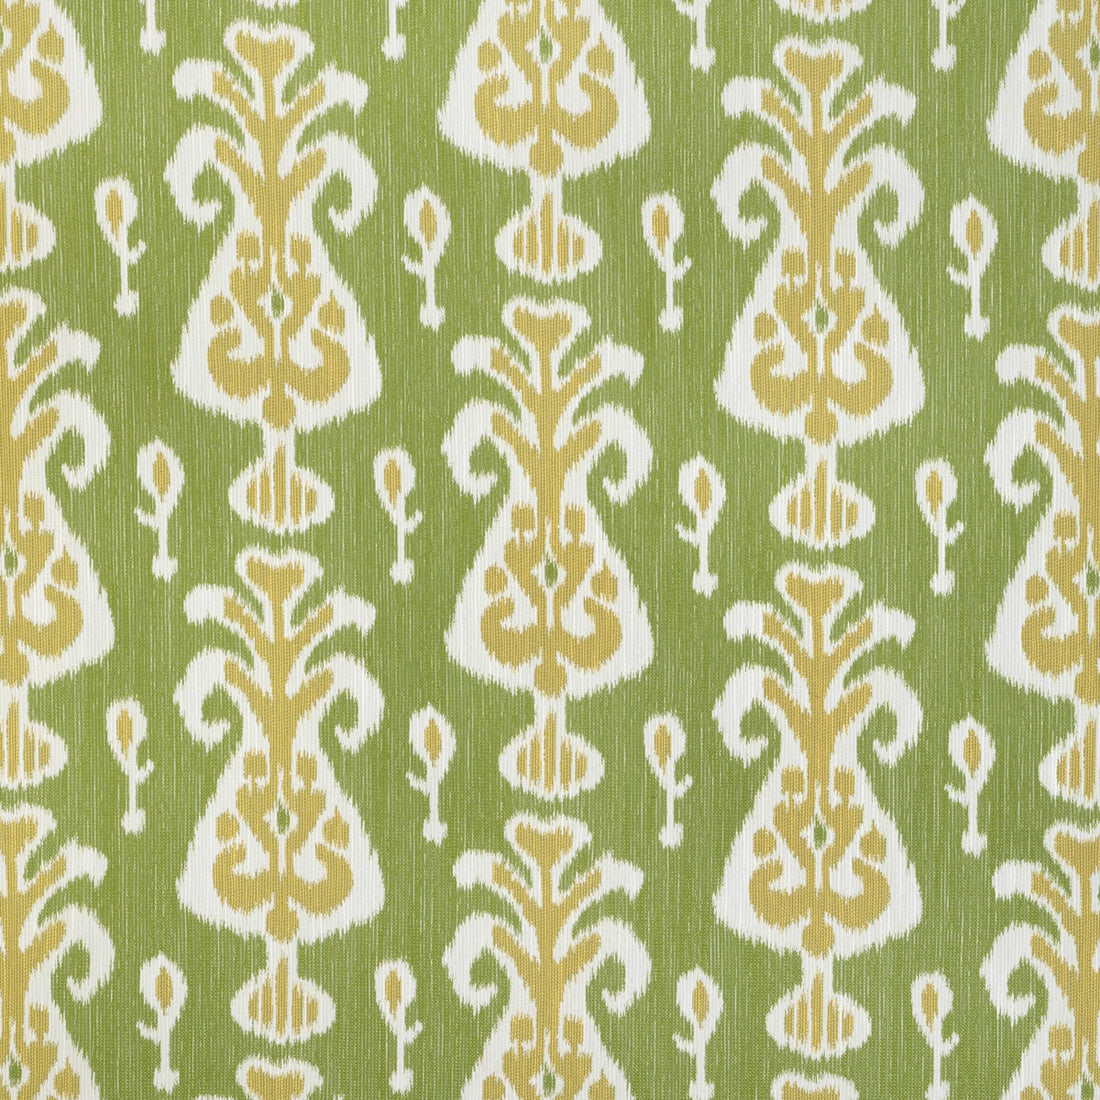 Kravet Design fabric in 36791-34 color - pattern 36791.34.0 - by Kravet Design in the Sea Island Inside Out collection